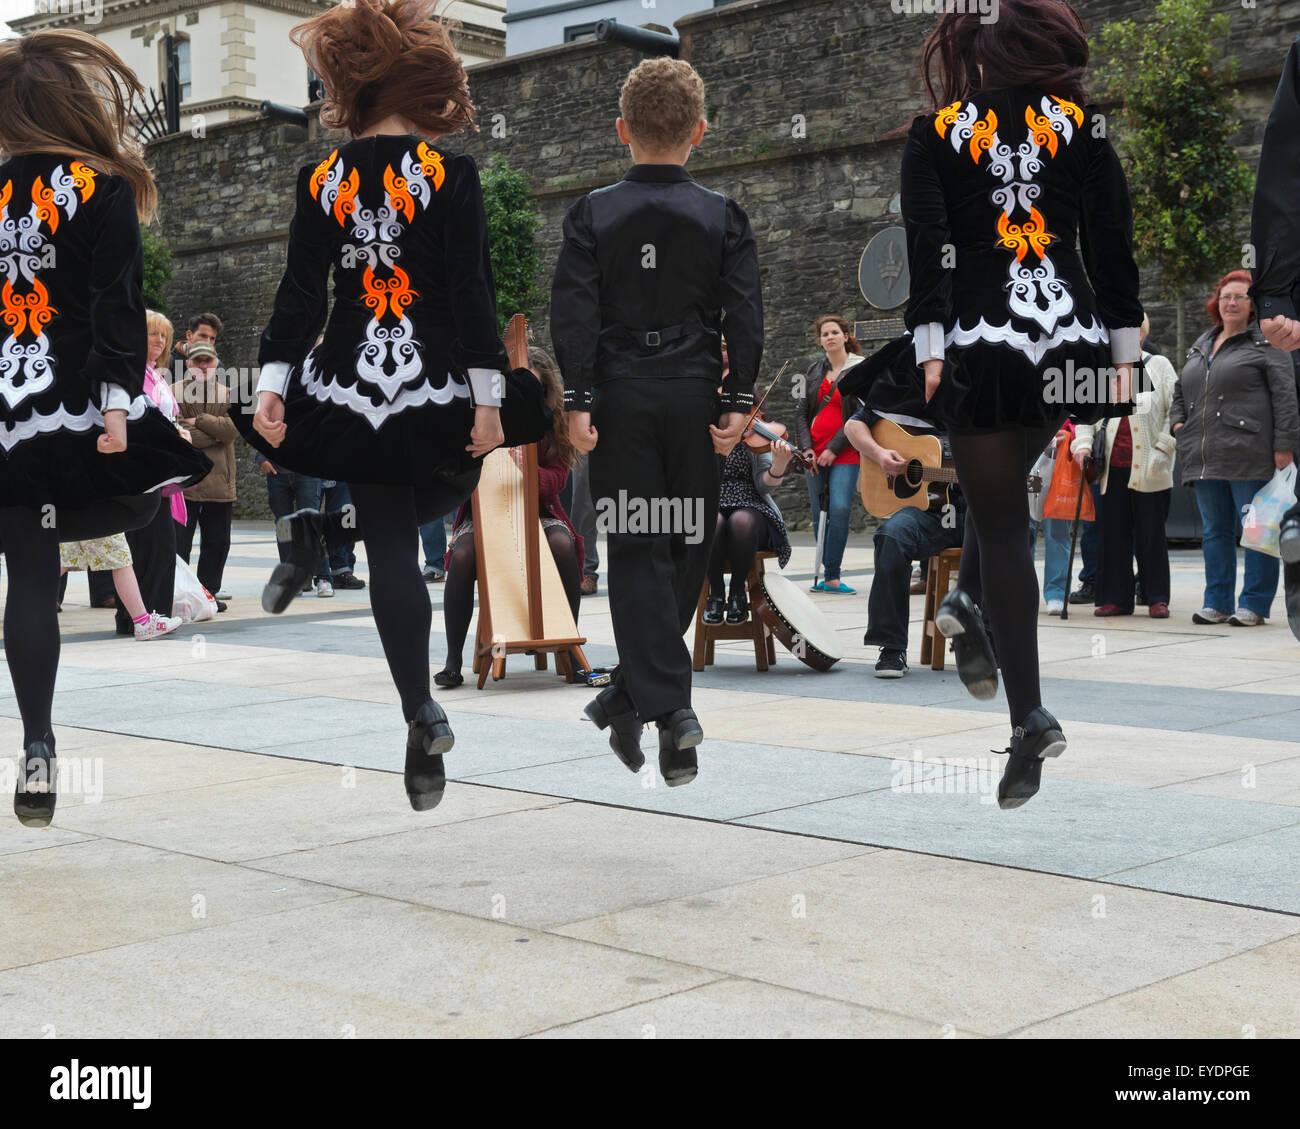 United Kingdom, Northern Ireland, County Londonderry, Irish dancers and musicians playing at Guildhall Square; Derry Stock Photo